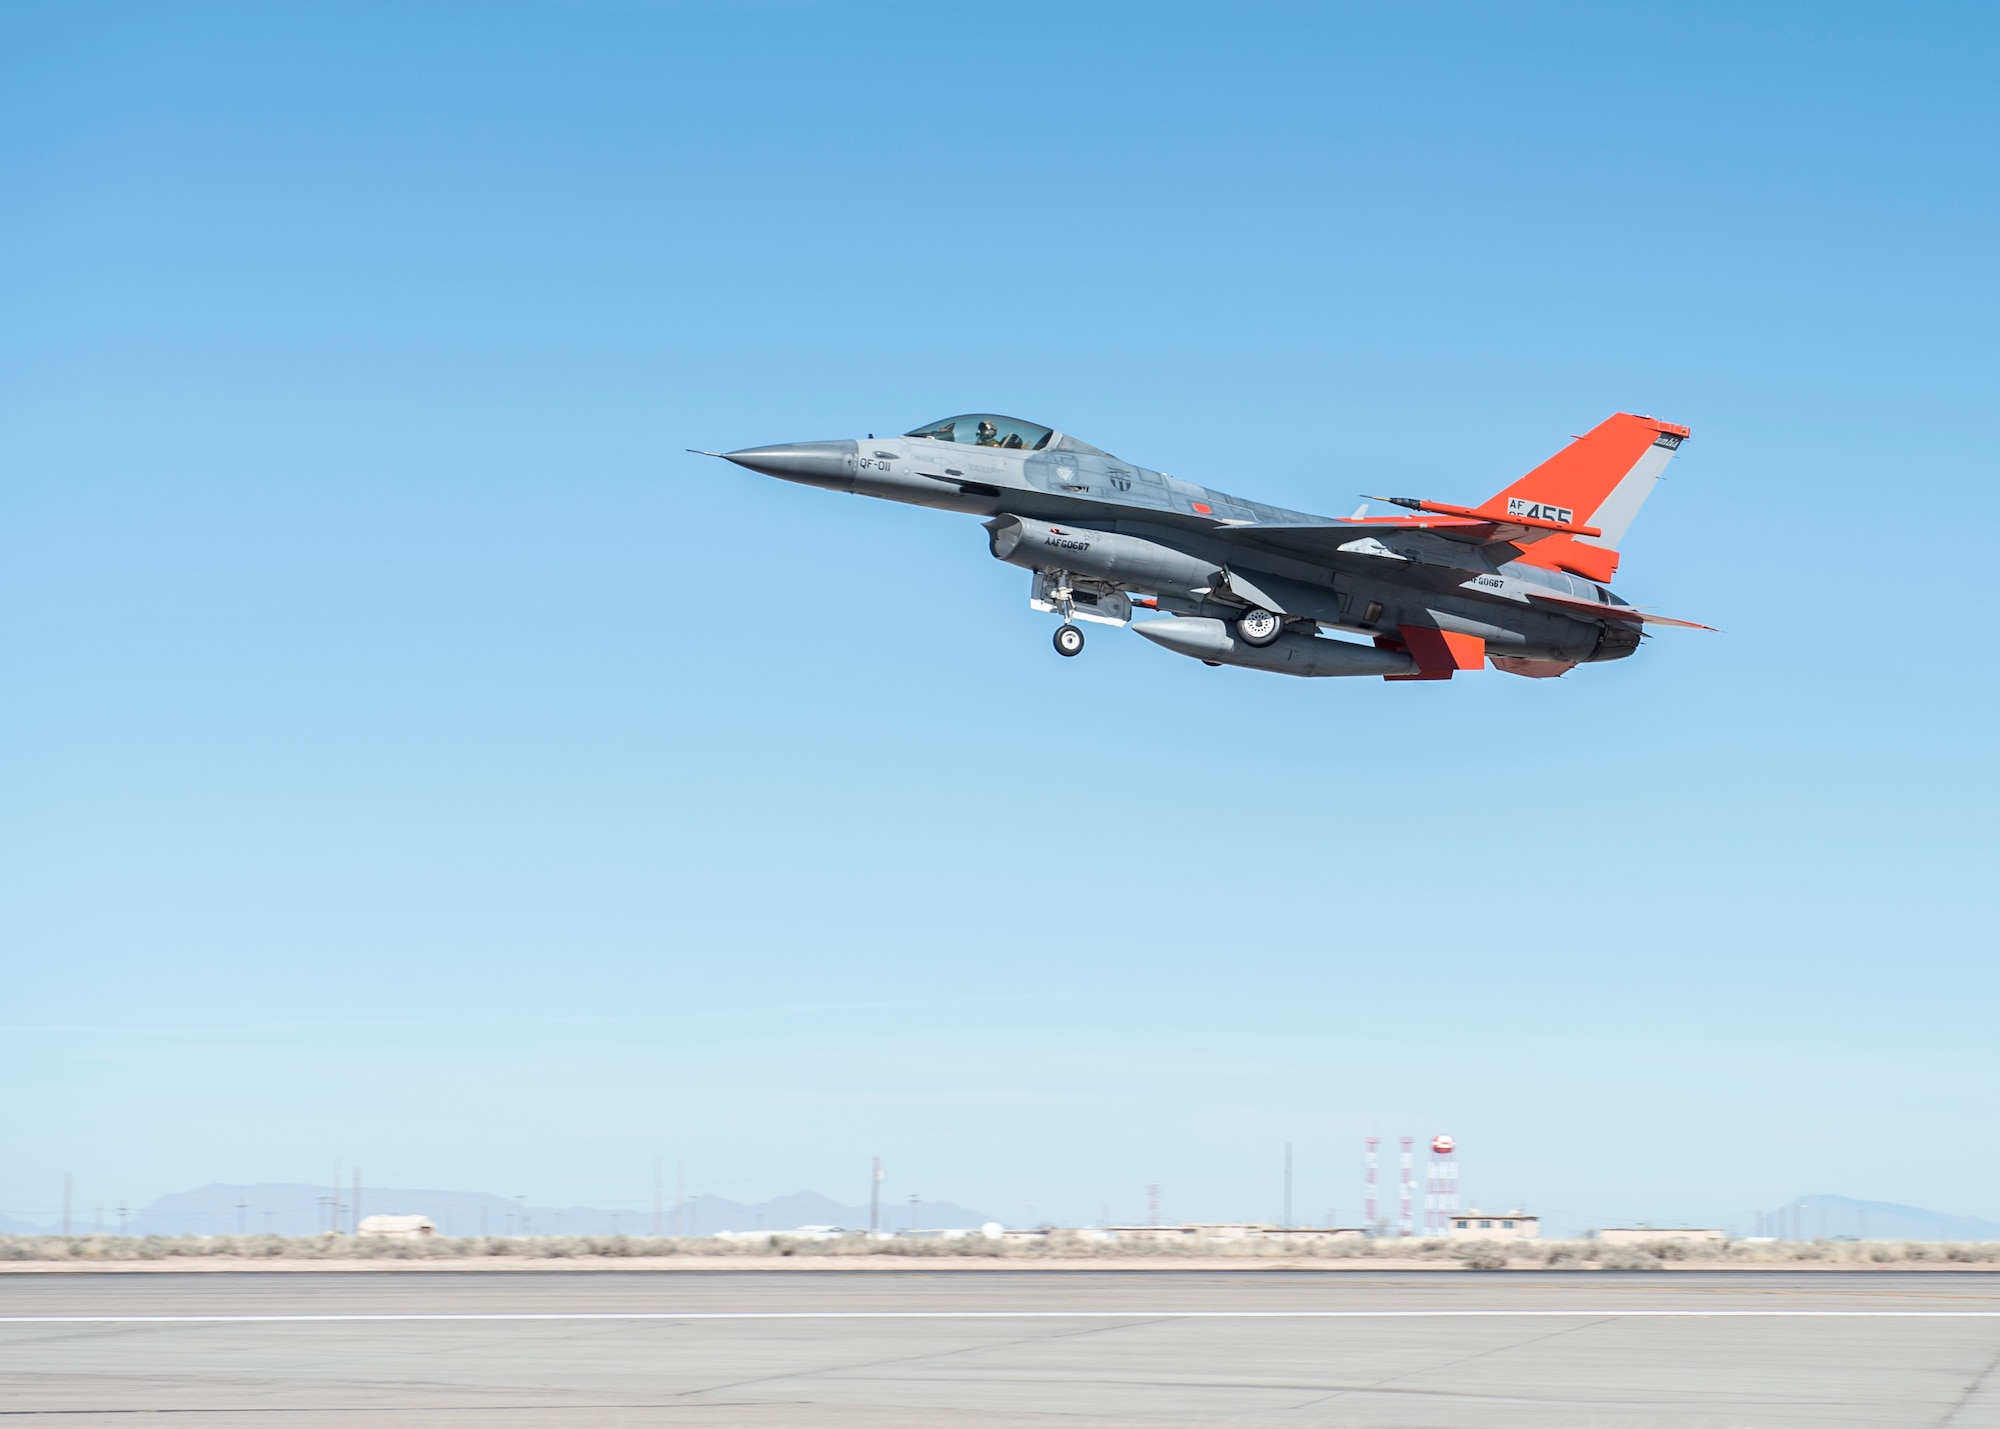 A QF-16 drone flies over Holloman Air Force Base, N.M., on Feb. 10, 2017. Lt. Col. Ronald King, the 82nd Aerial Targets Squadron, Det. 1 commander, piloted the drone during the first flight at Holloman since the transition from QF-4 Phantoms to QF-16s. The QF-16 serves as a full-scale aerial target to test next-generation weapons systems. (U.S. Air Force photo by Senior Airman Emily Kenney)